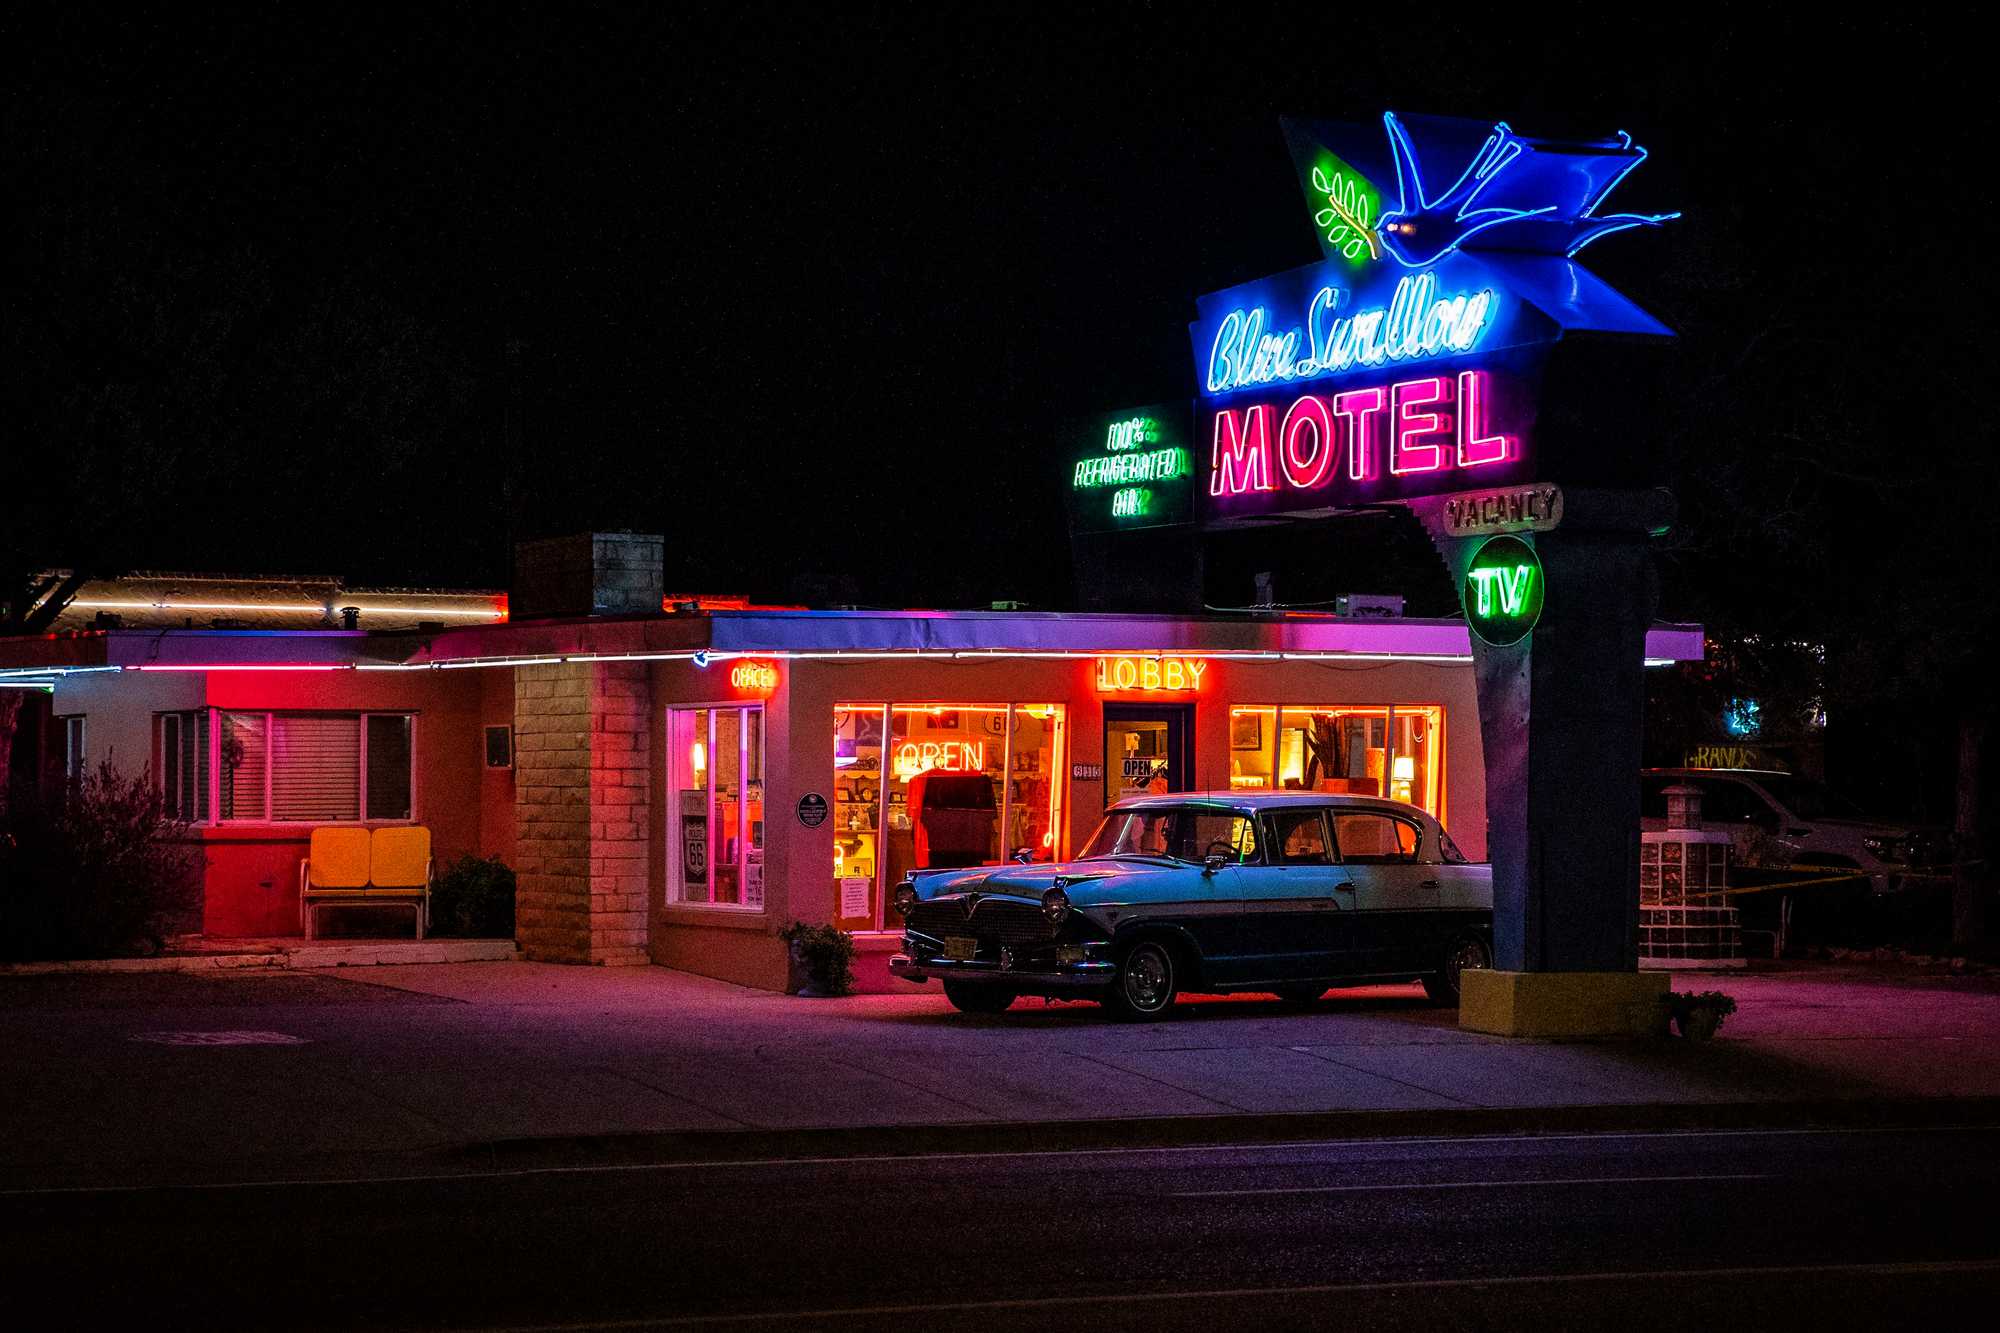 The Blue Swallow Motel along the iconic Route 66 in Tucumcari, N.M. 